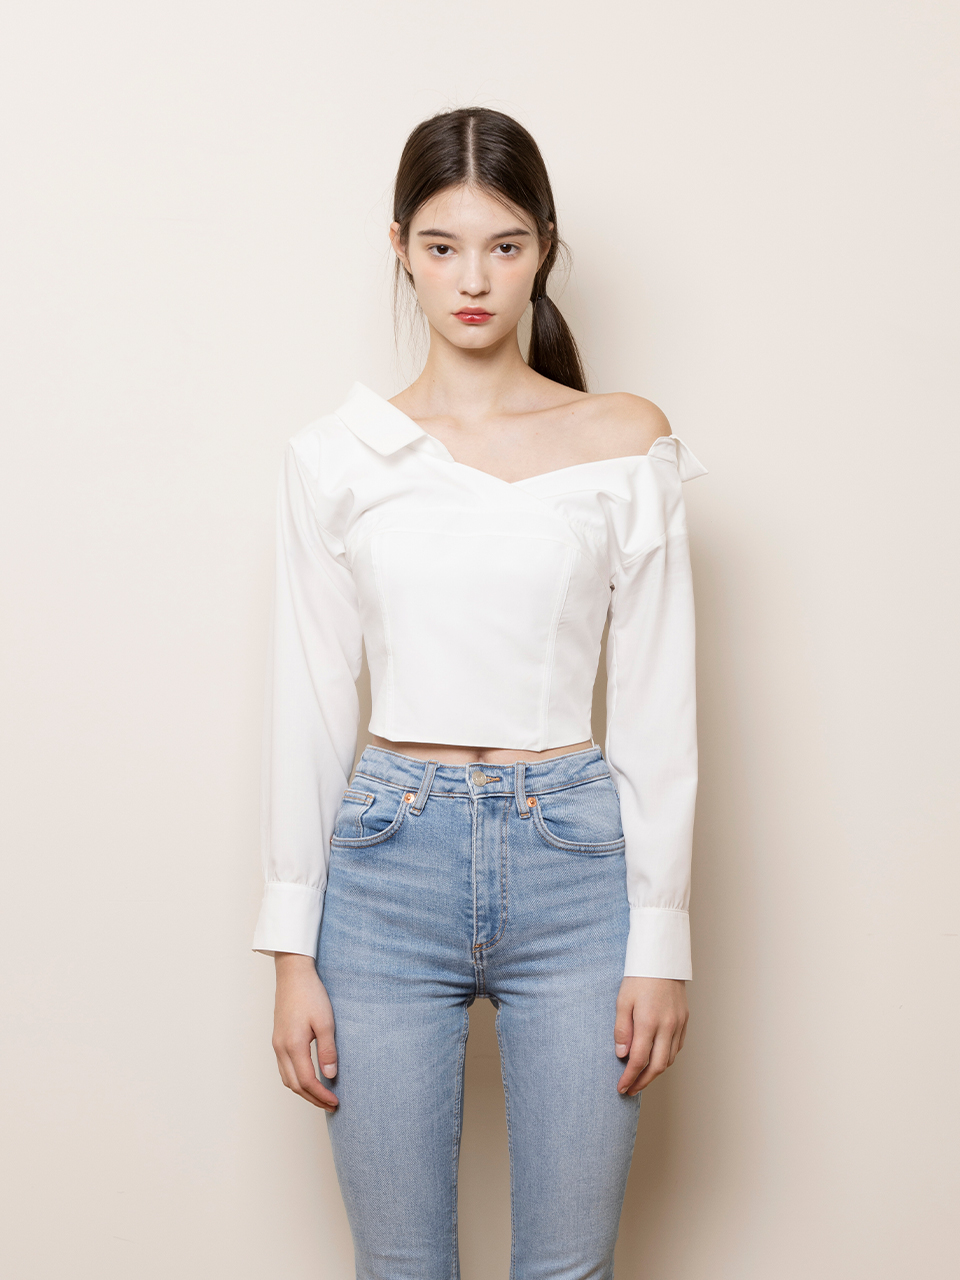 Ines shirts bustier